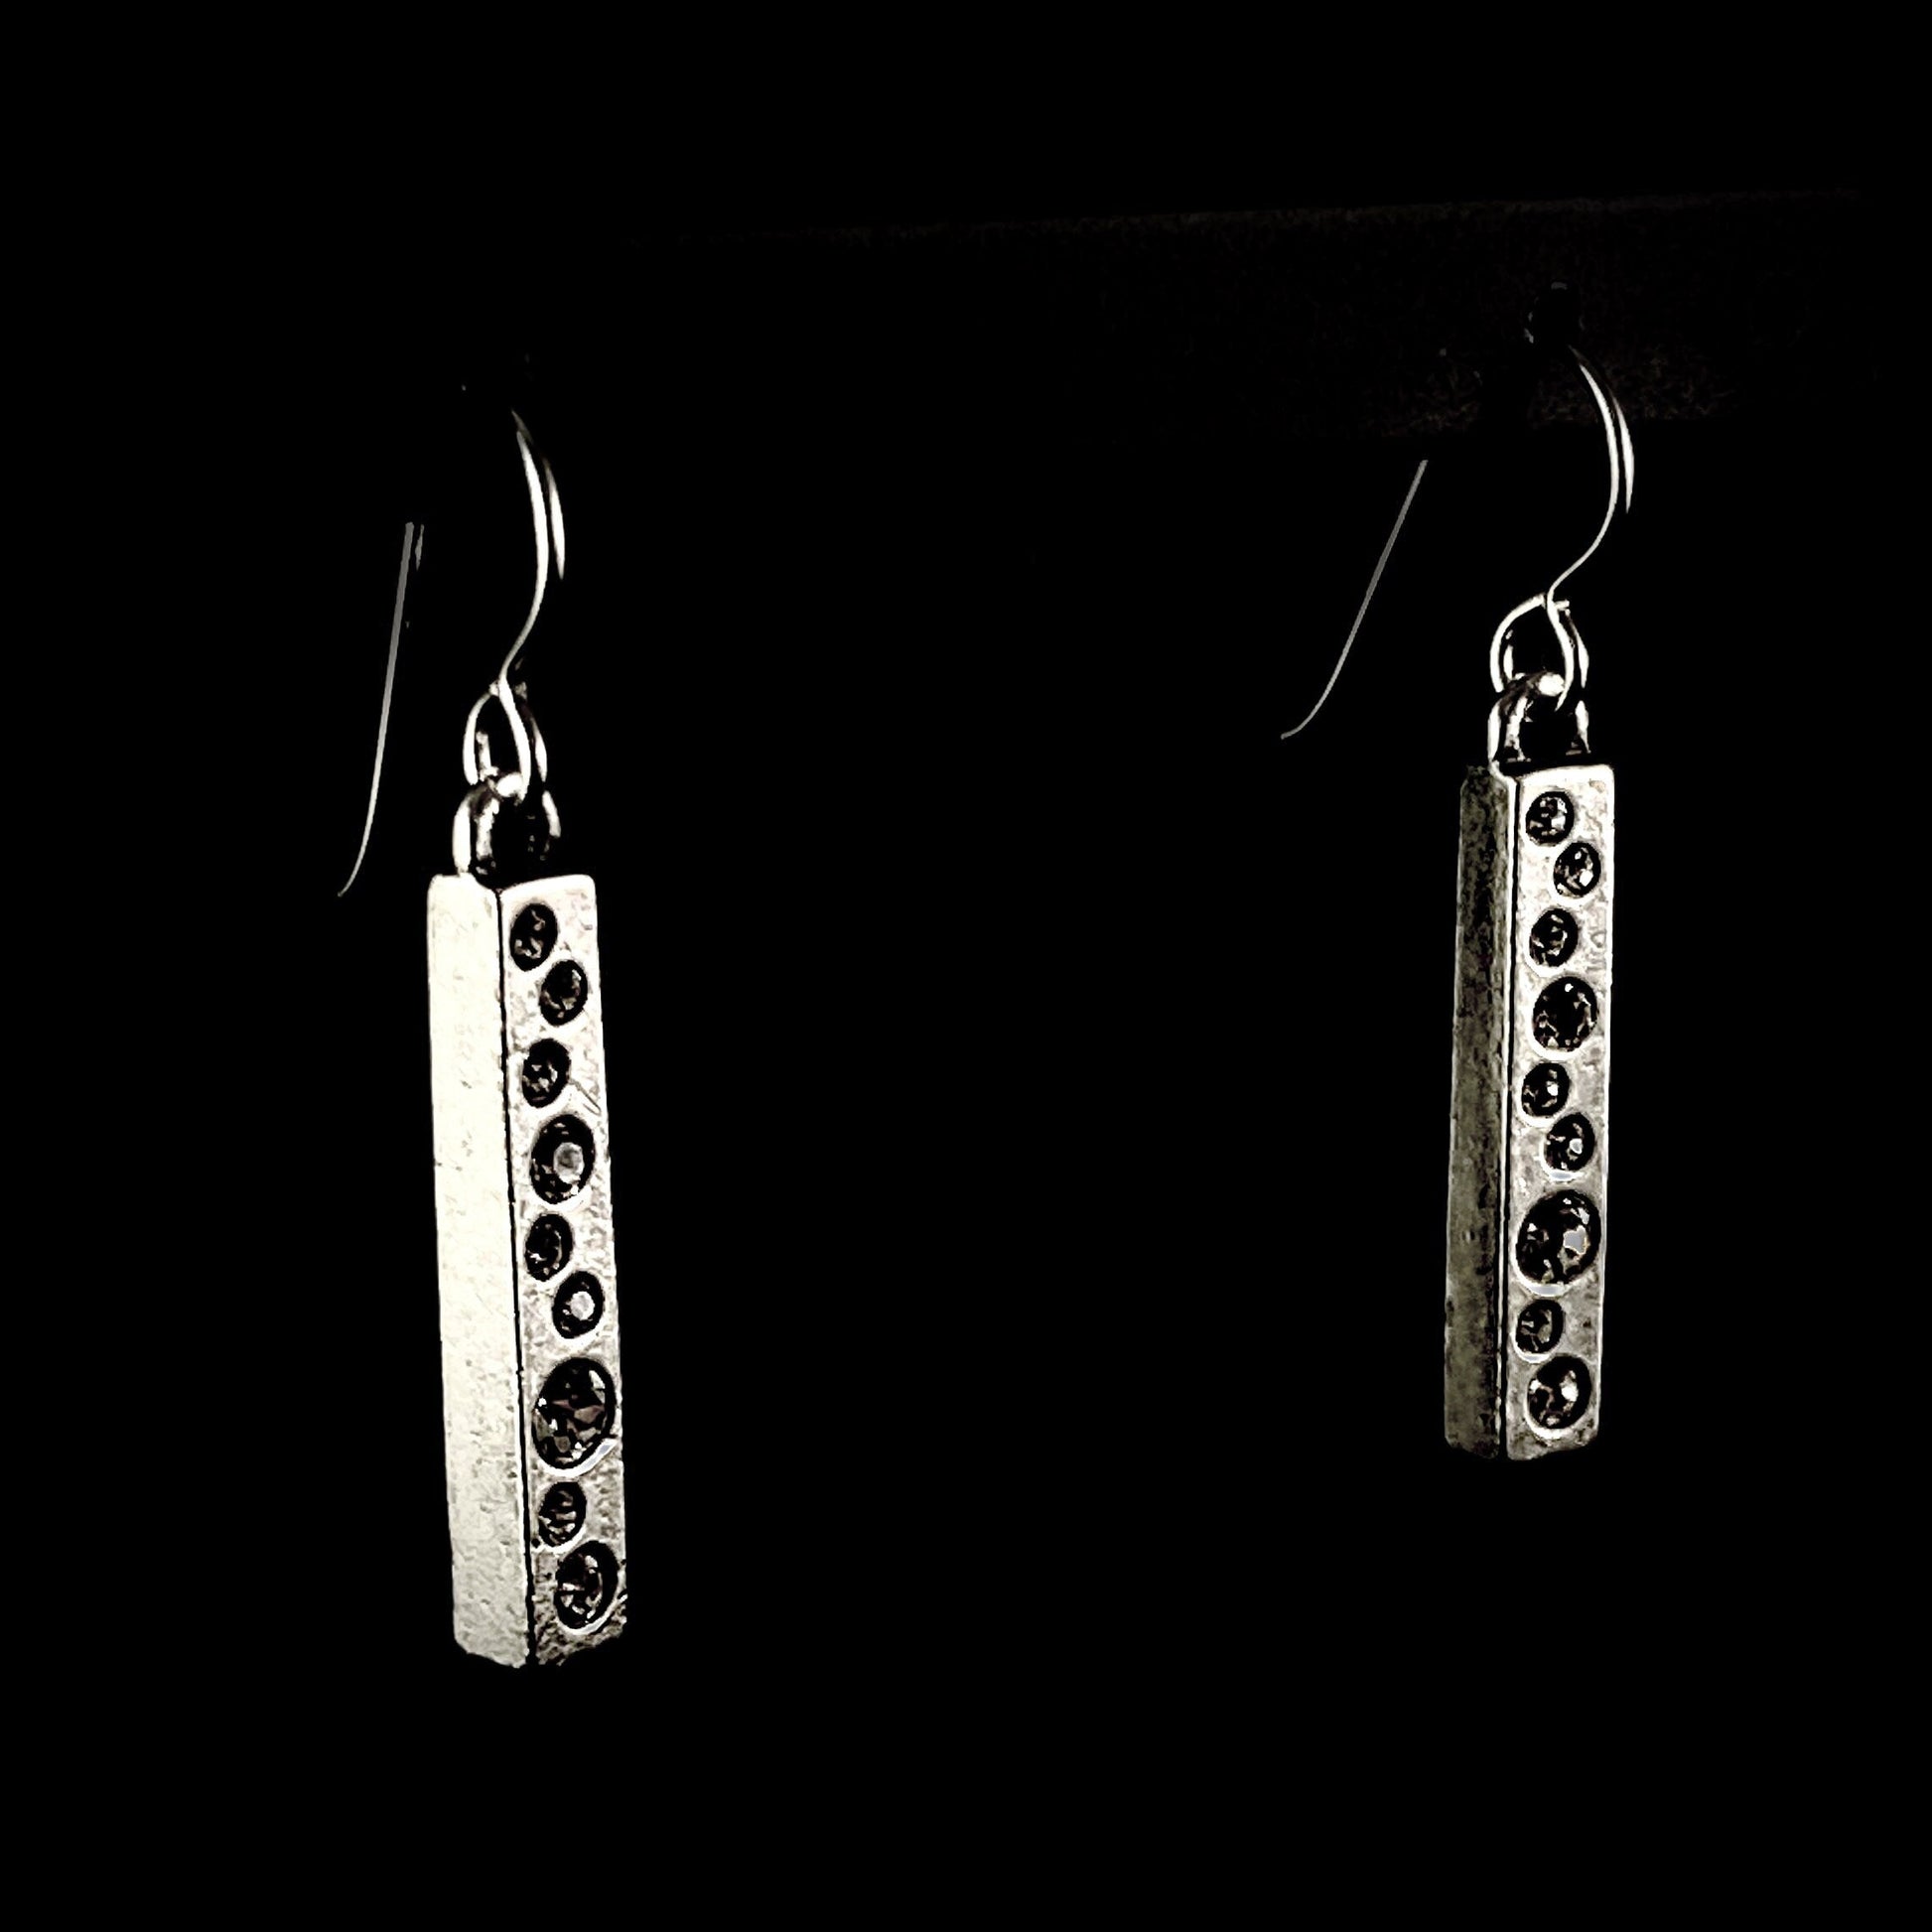 Rook and Crow Handmade Silver Tower Earrings with Scattered Crystals - Waterfall